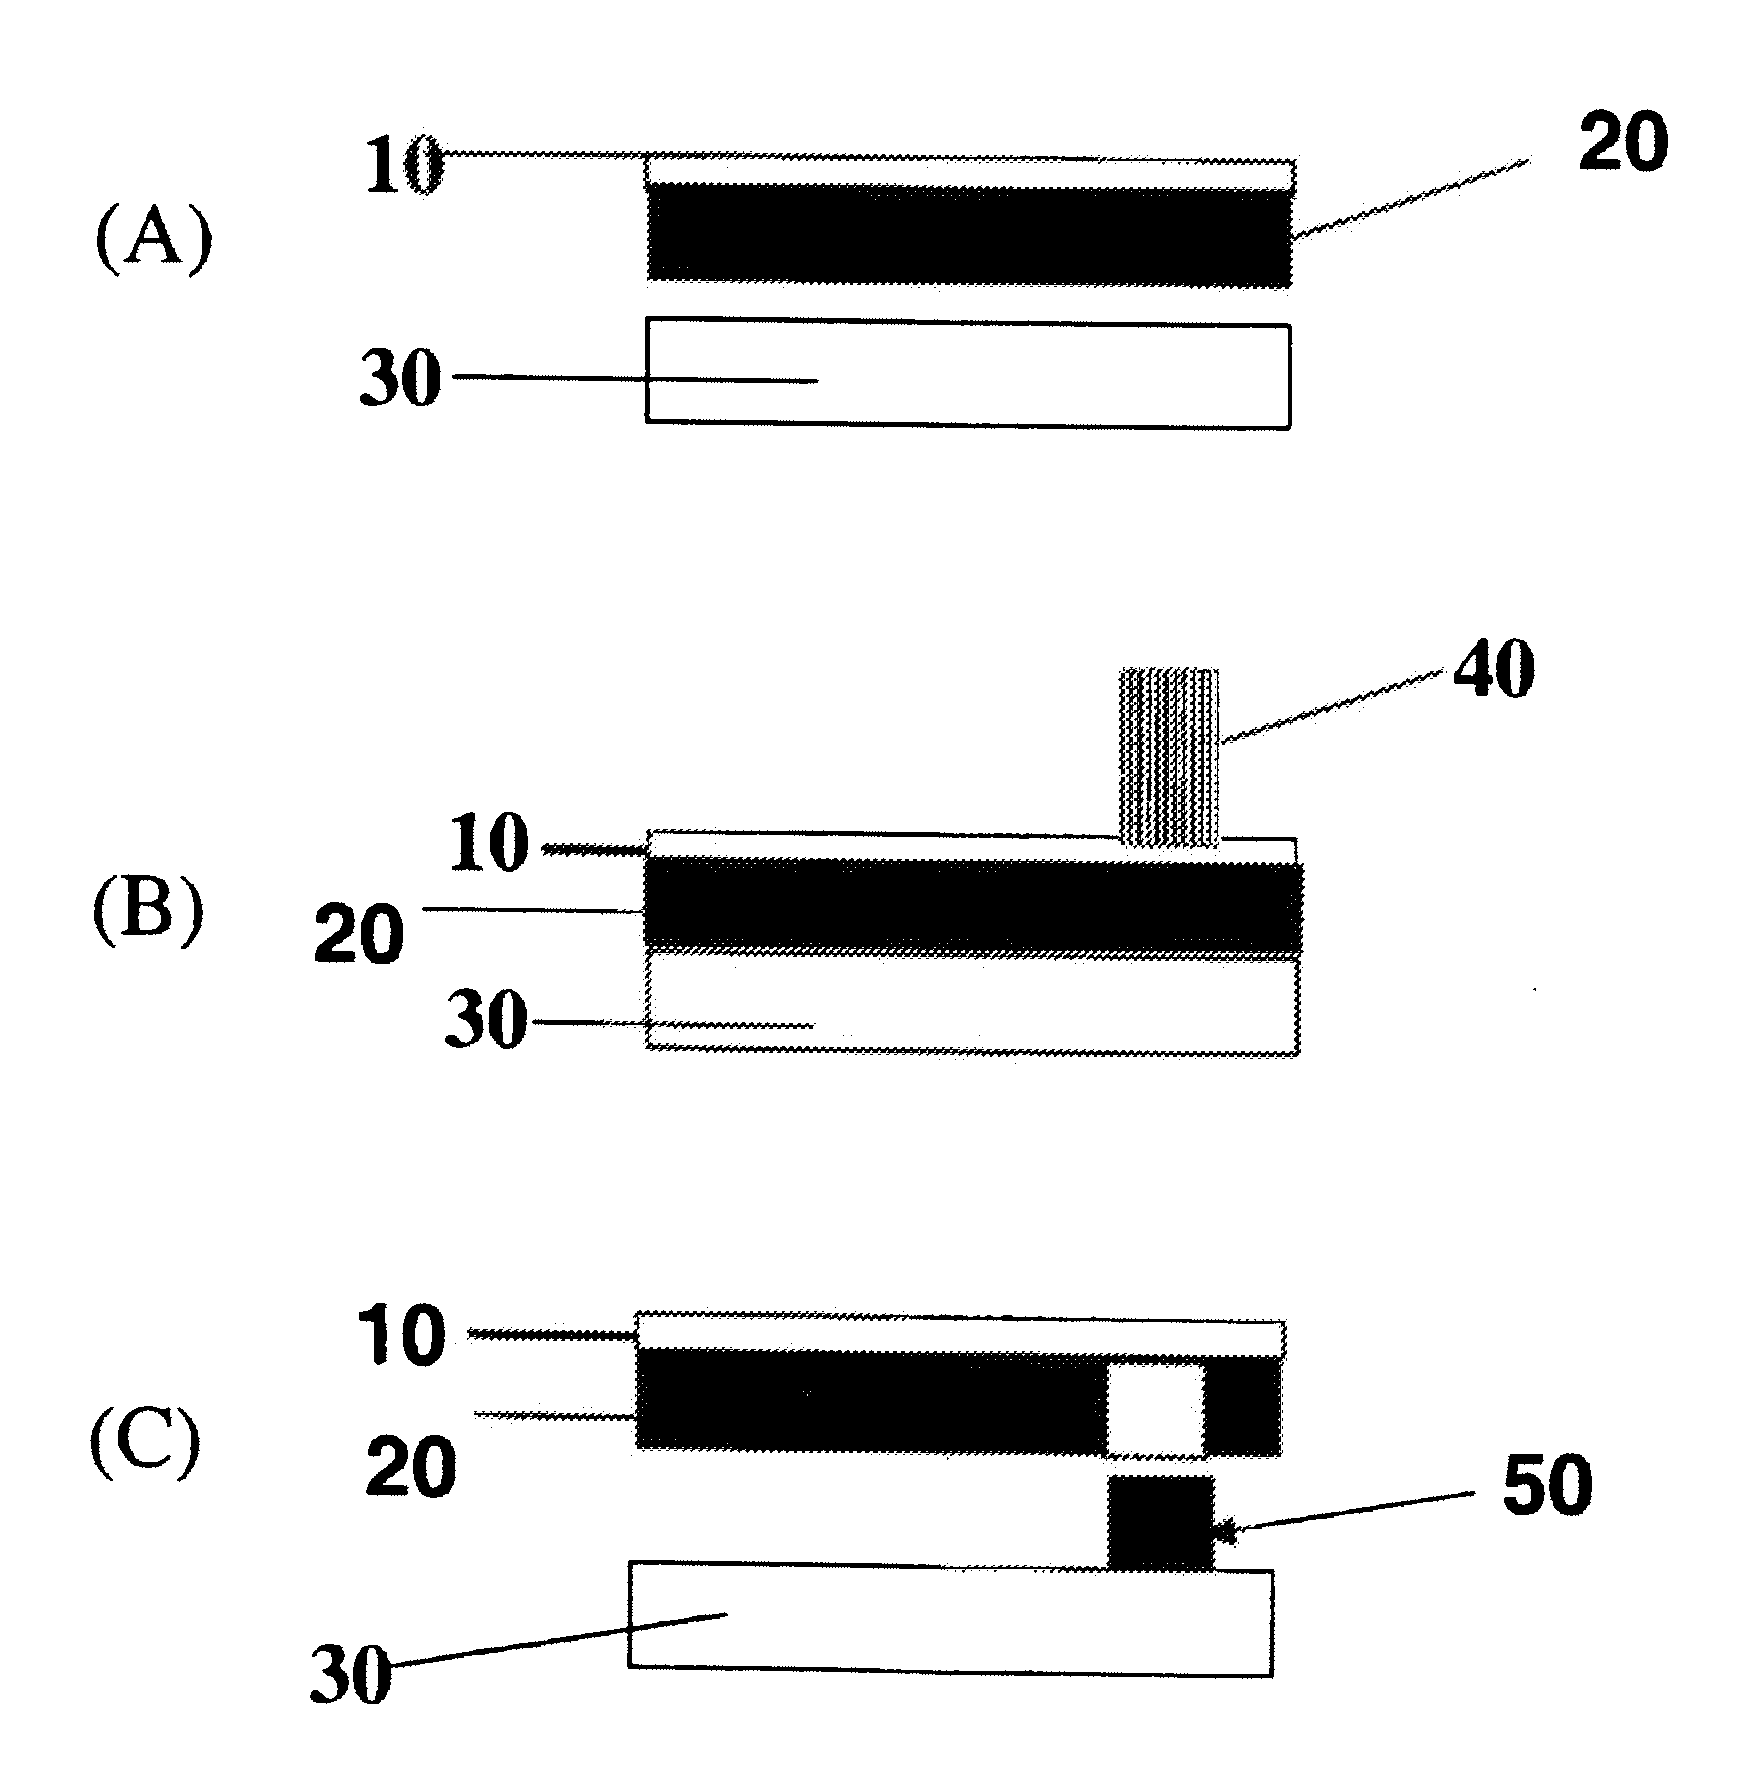 Laser transfer articles and method of making